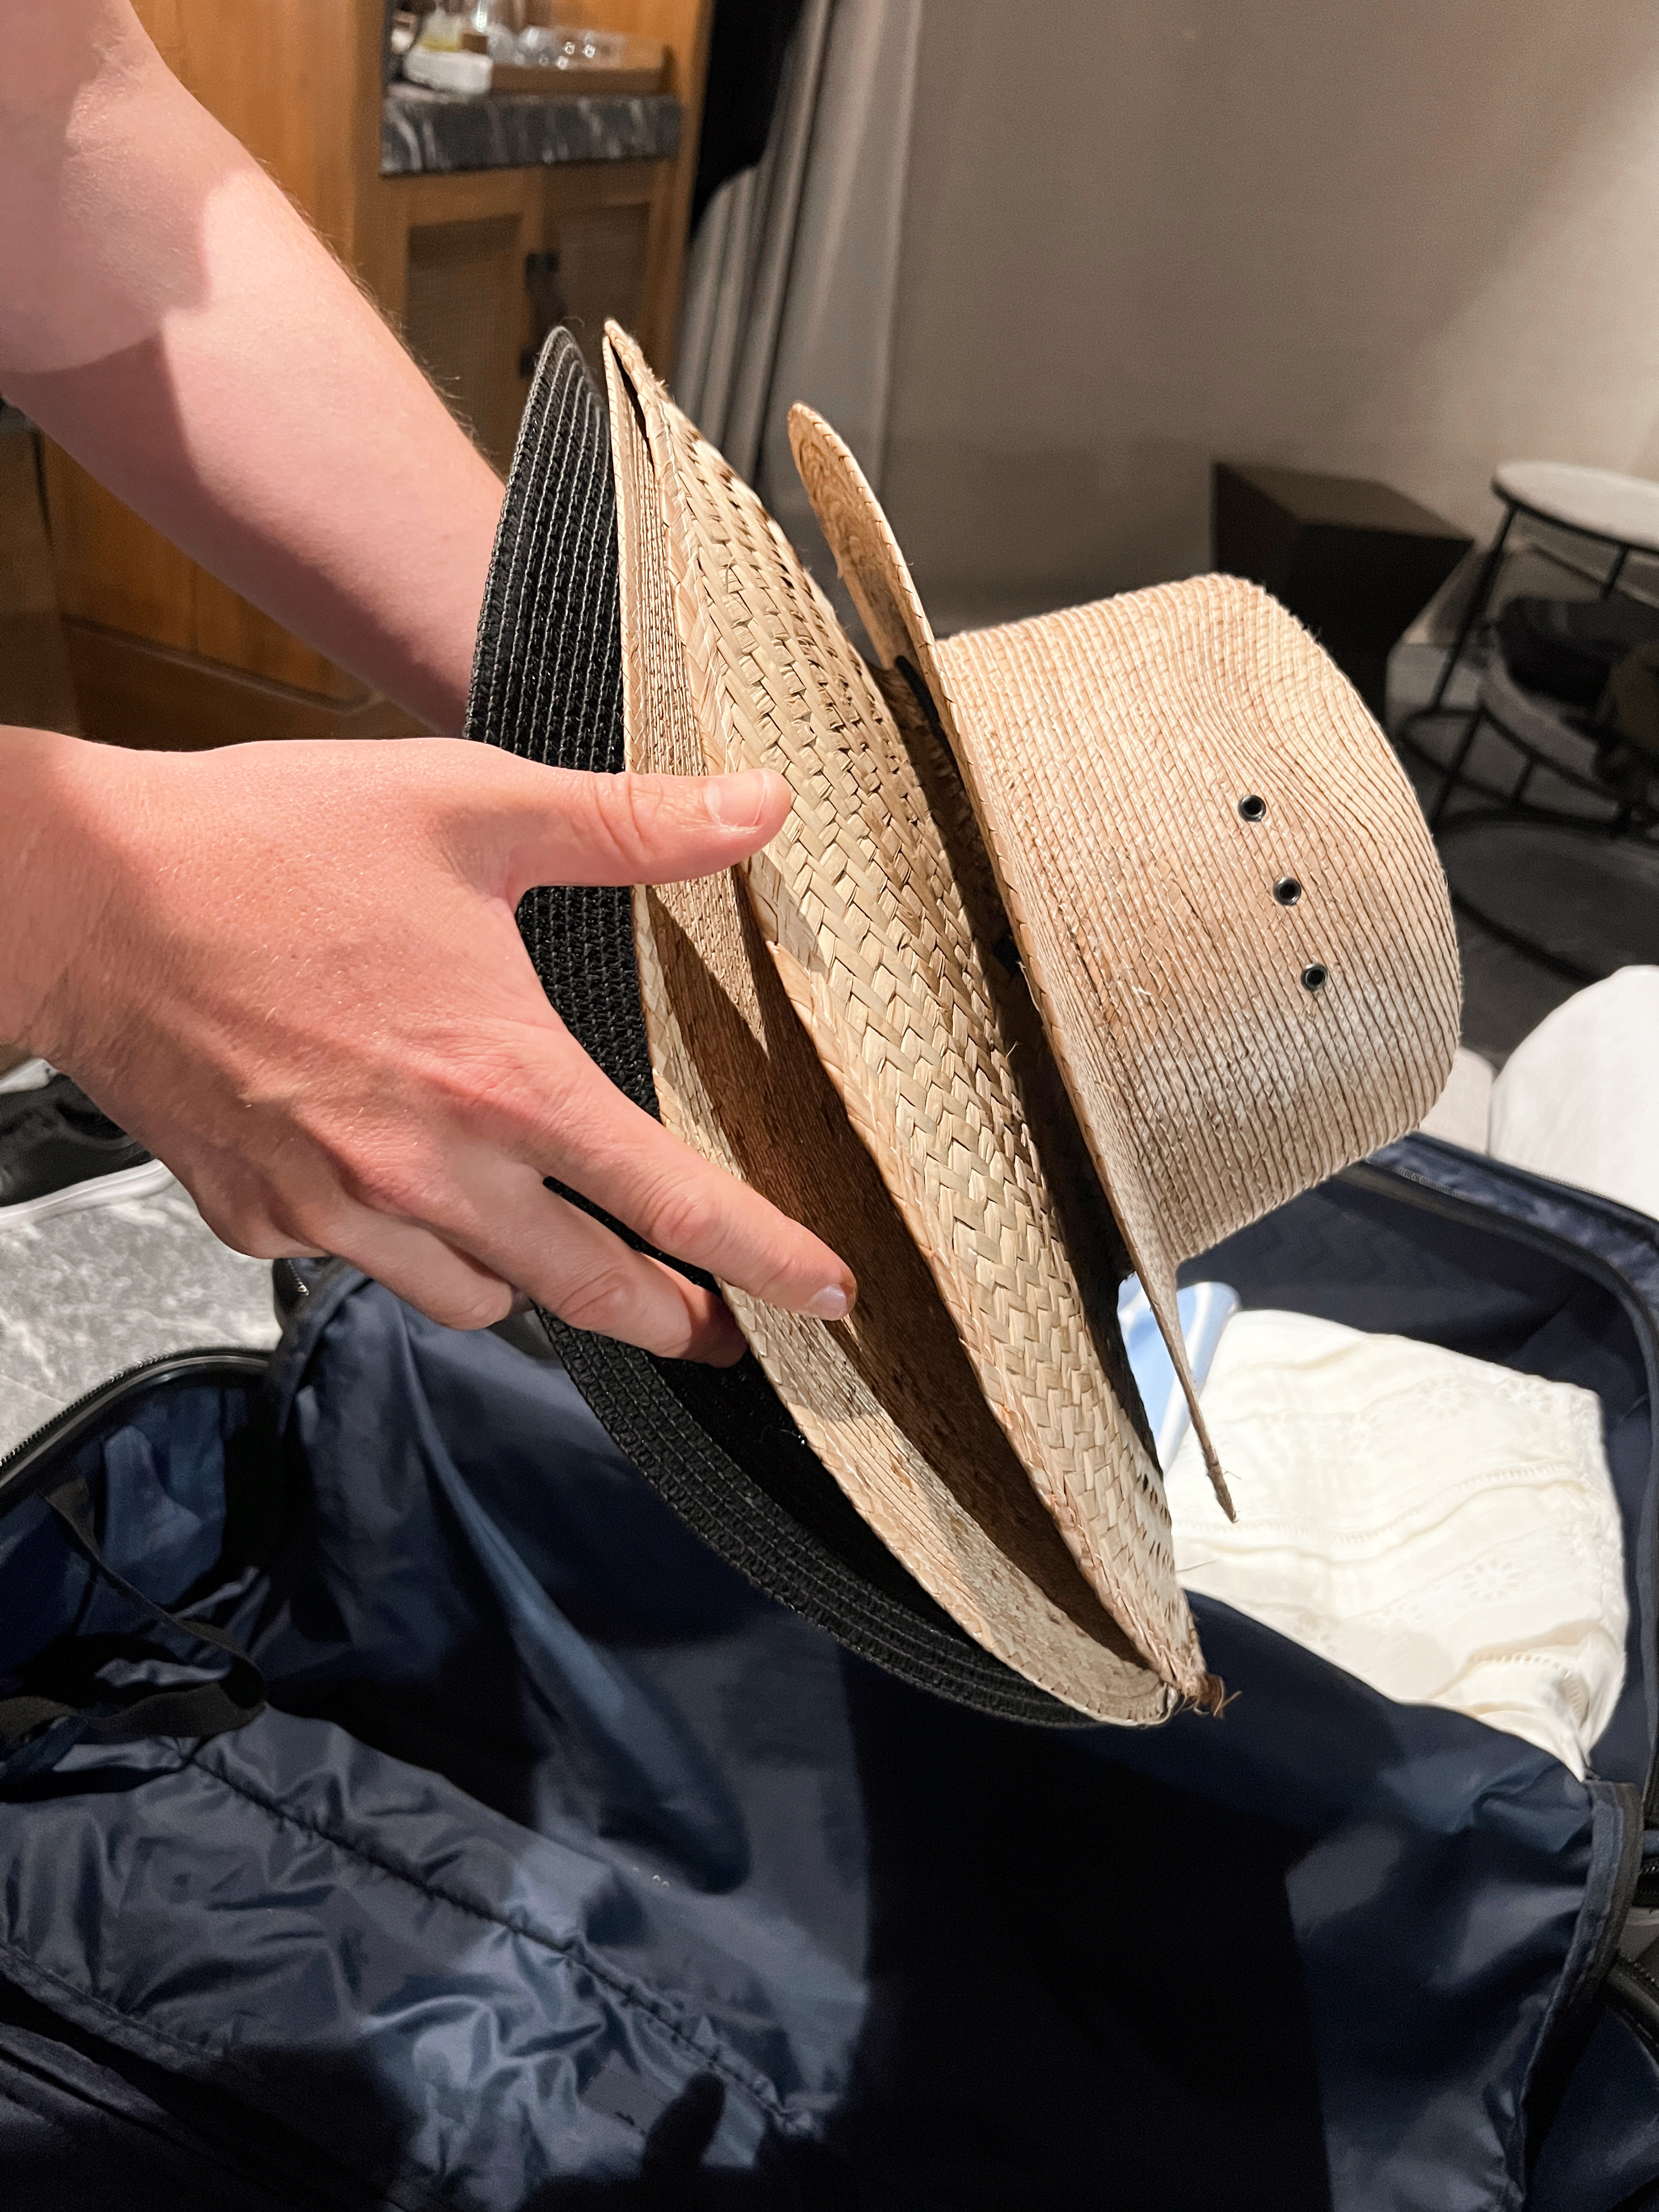 How to pack a hat in your suitcase